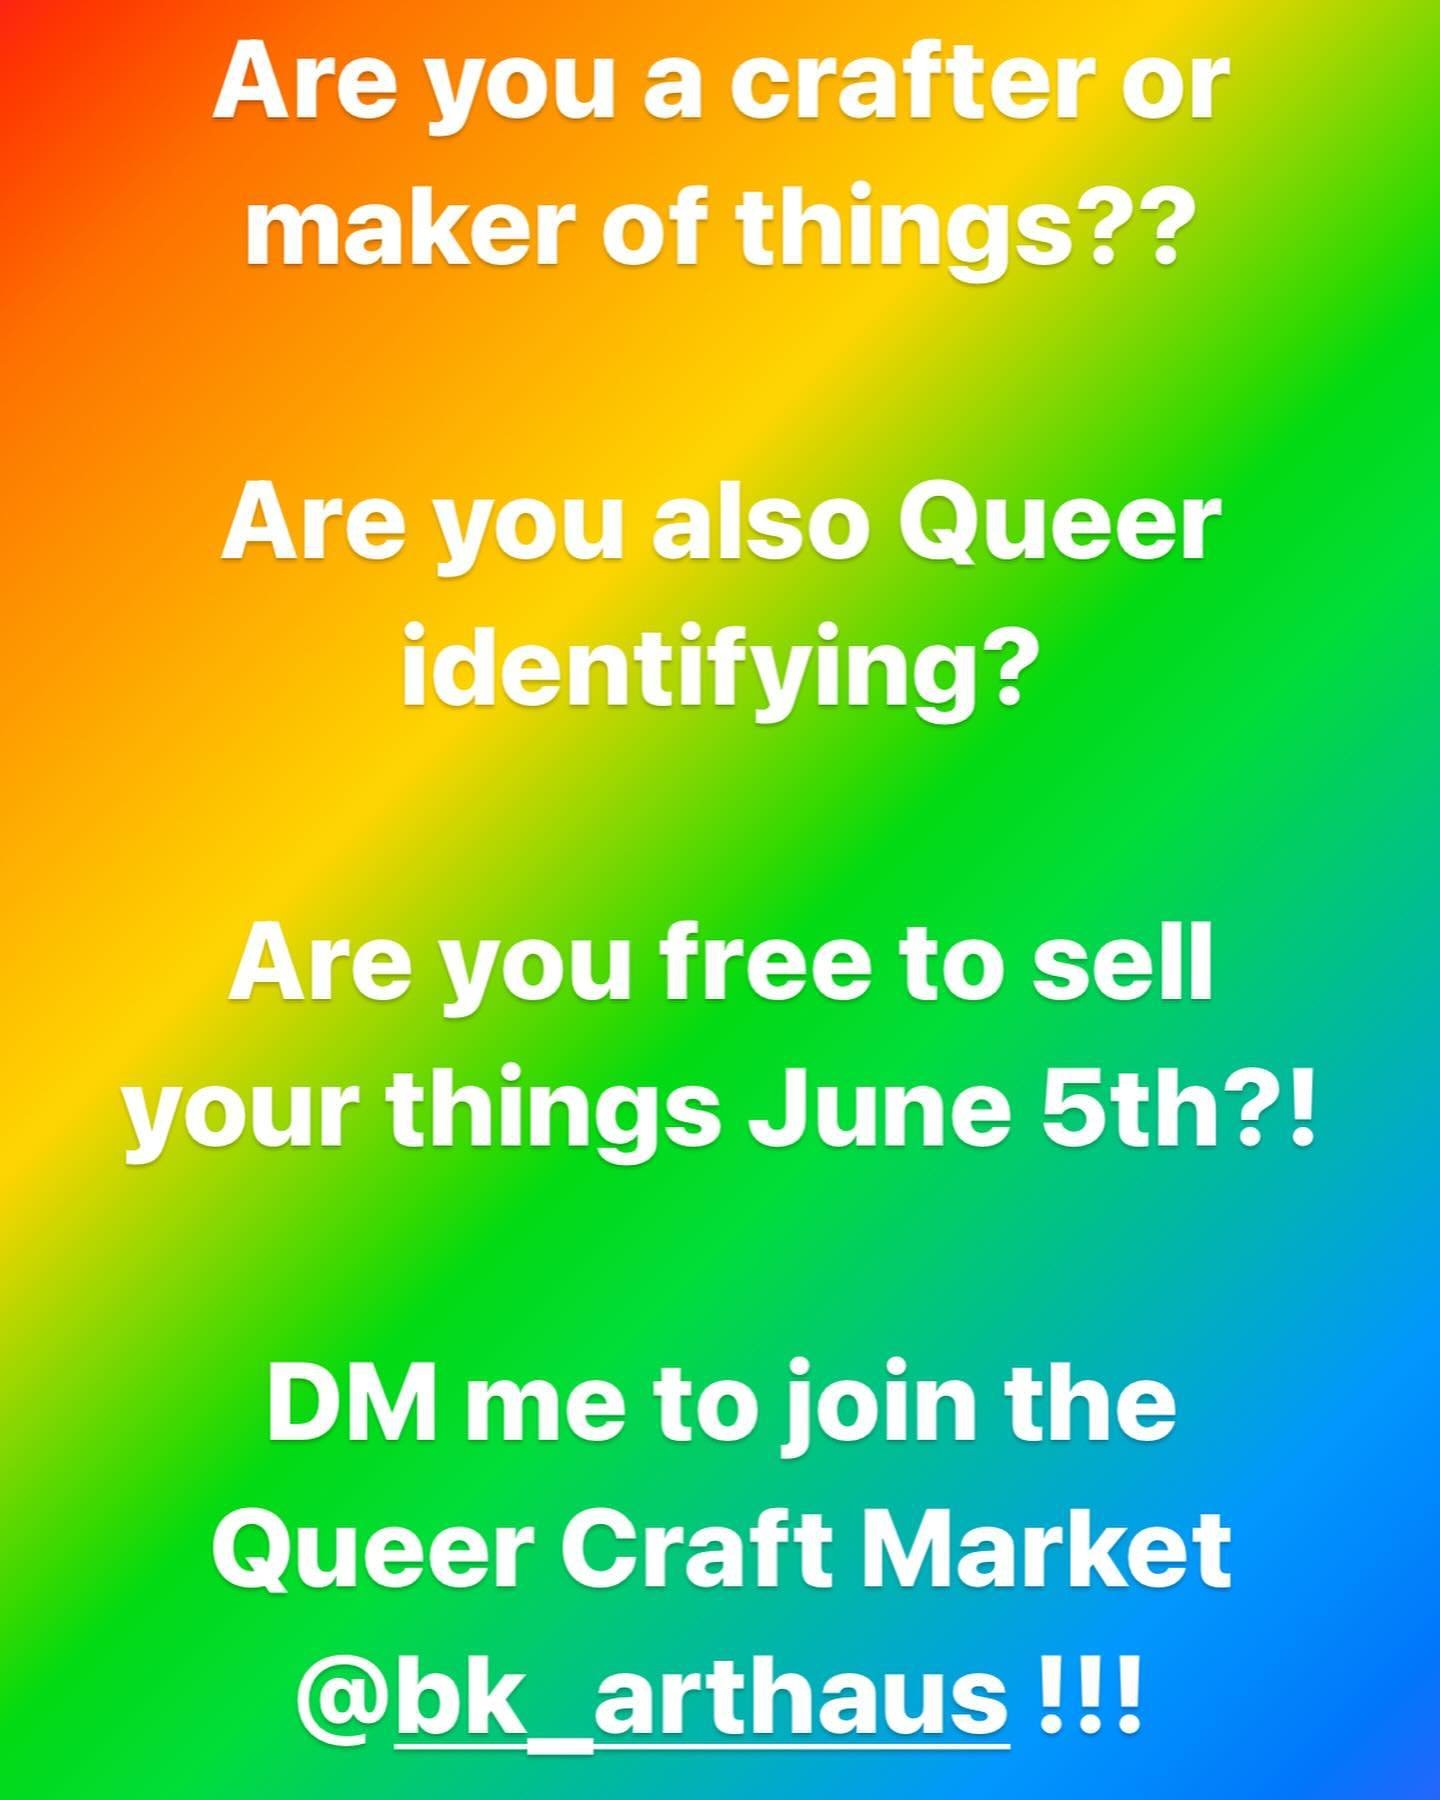 Do you make things or know someone who makes things? 
Are you queer? 
Are you free June 5th? 
Message me!!!